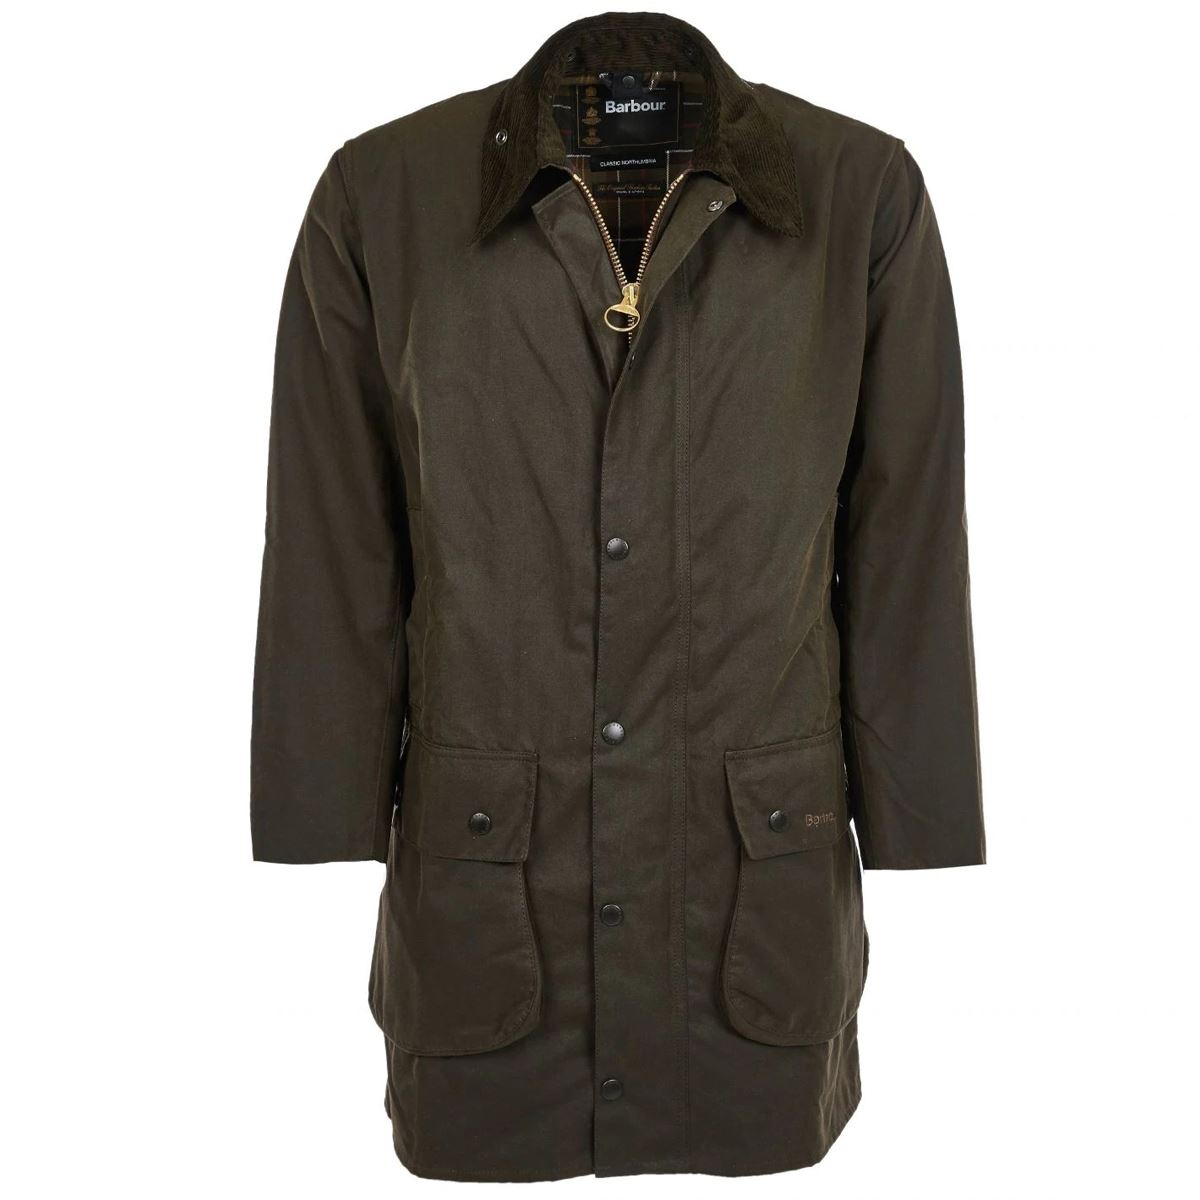 Does the Barbour Northumbria Wax Jacket resist abrasions?